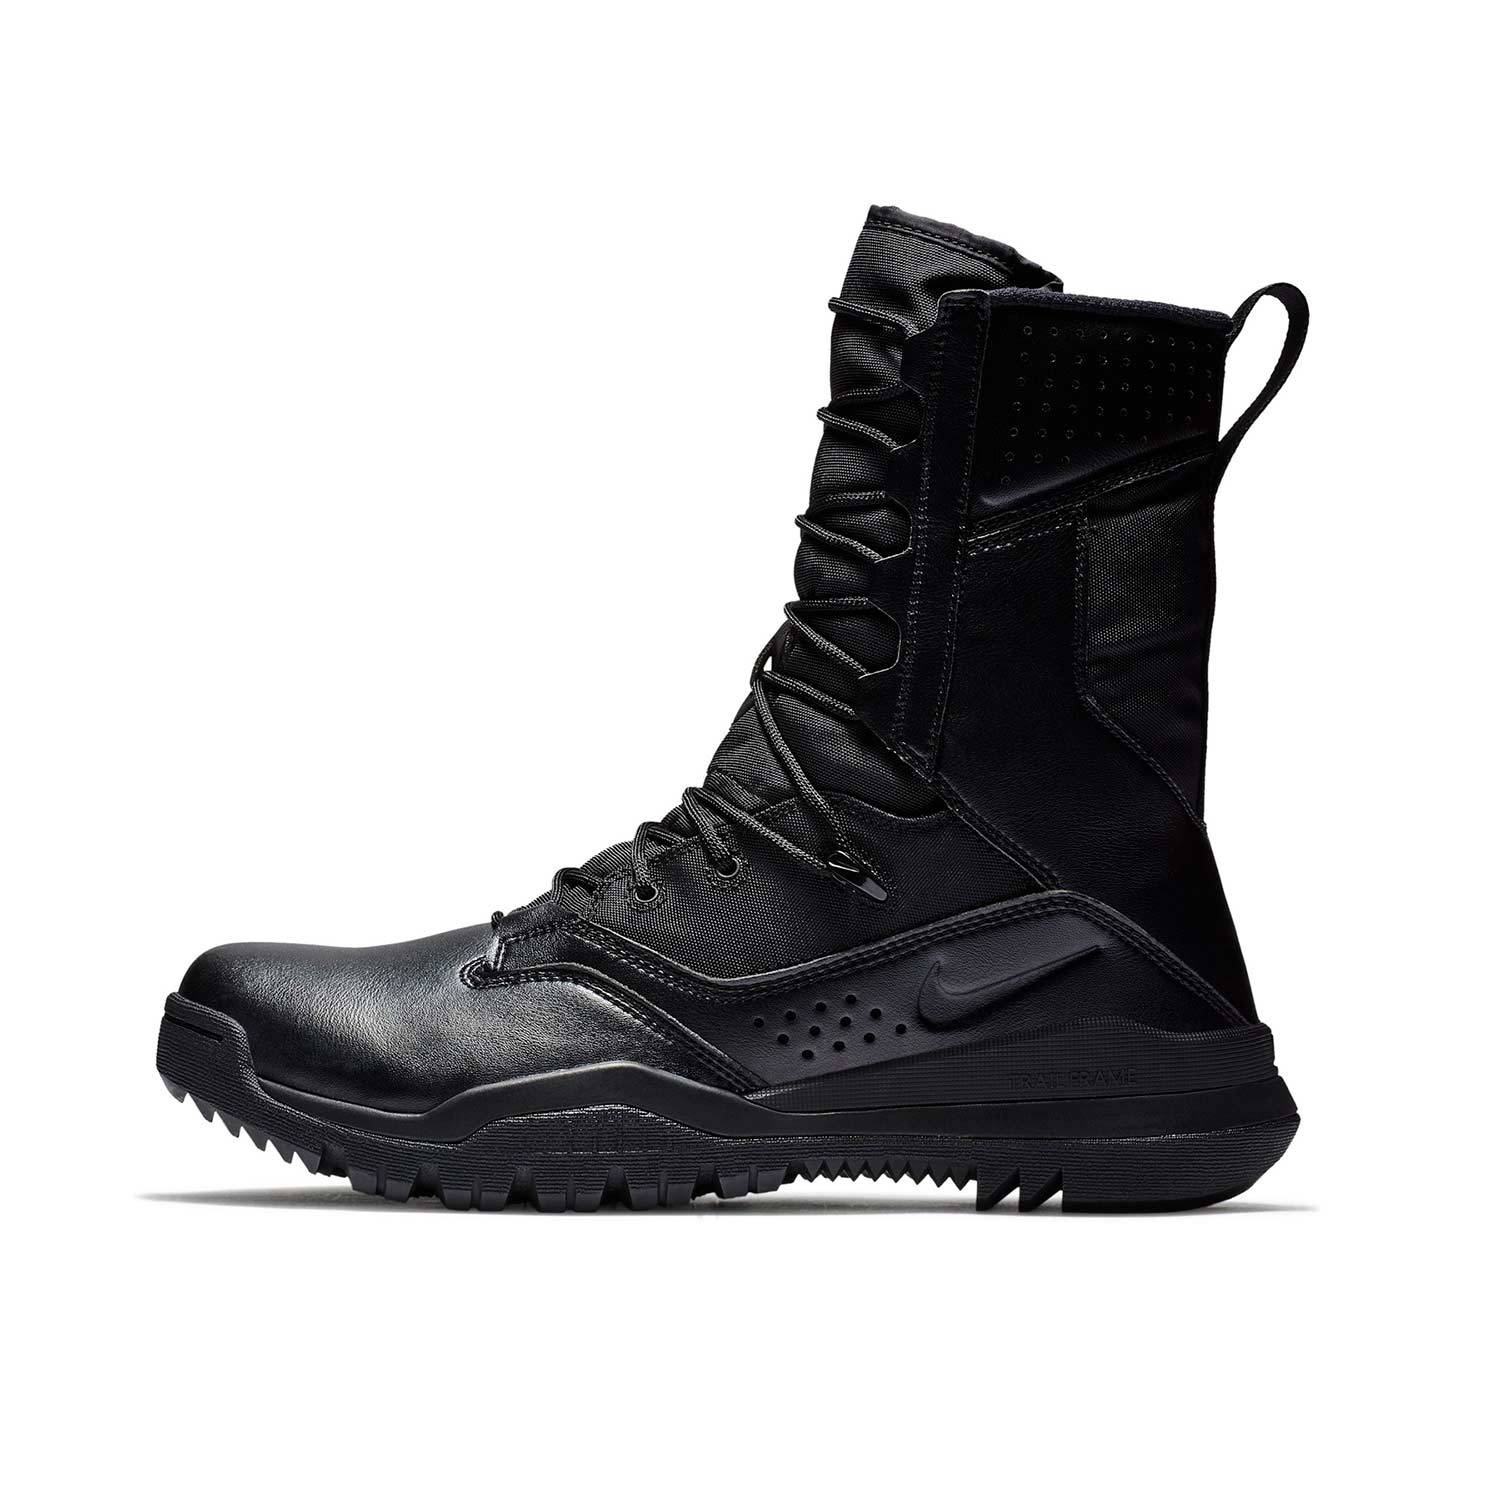 nike work boots composite toe